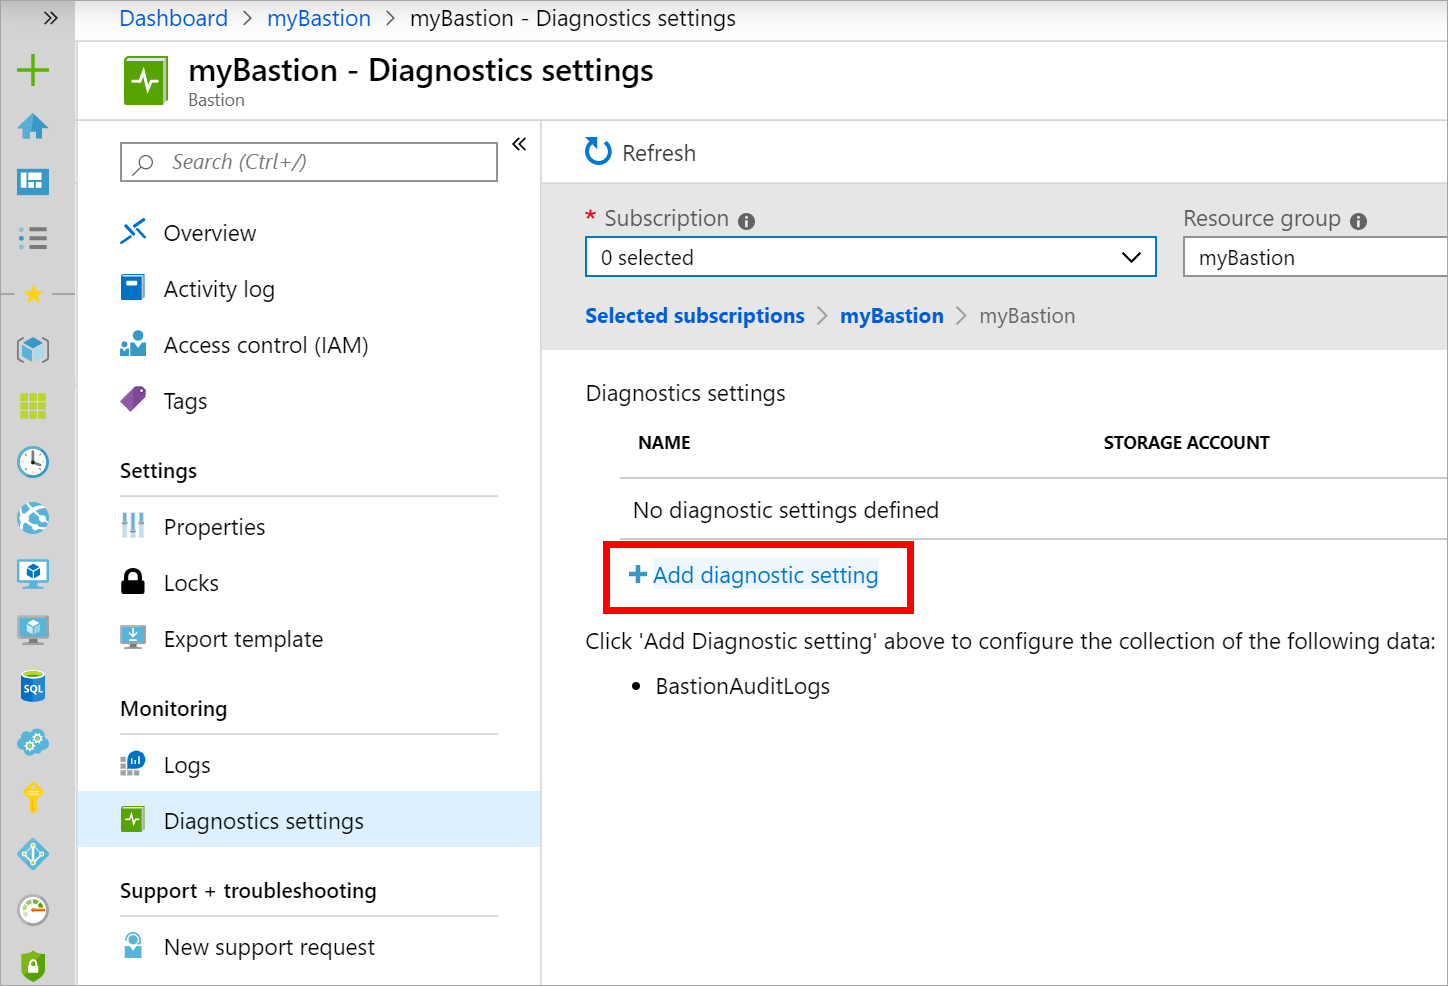 Screenshot that shows the "Diagnostics settings" page with the "Add diagnostic setting" button selected.